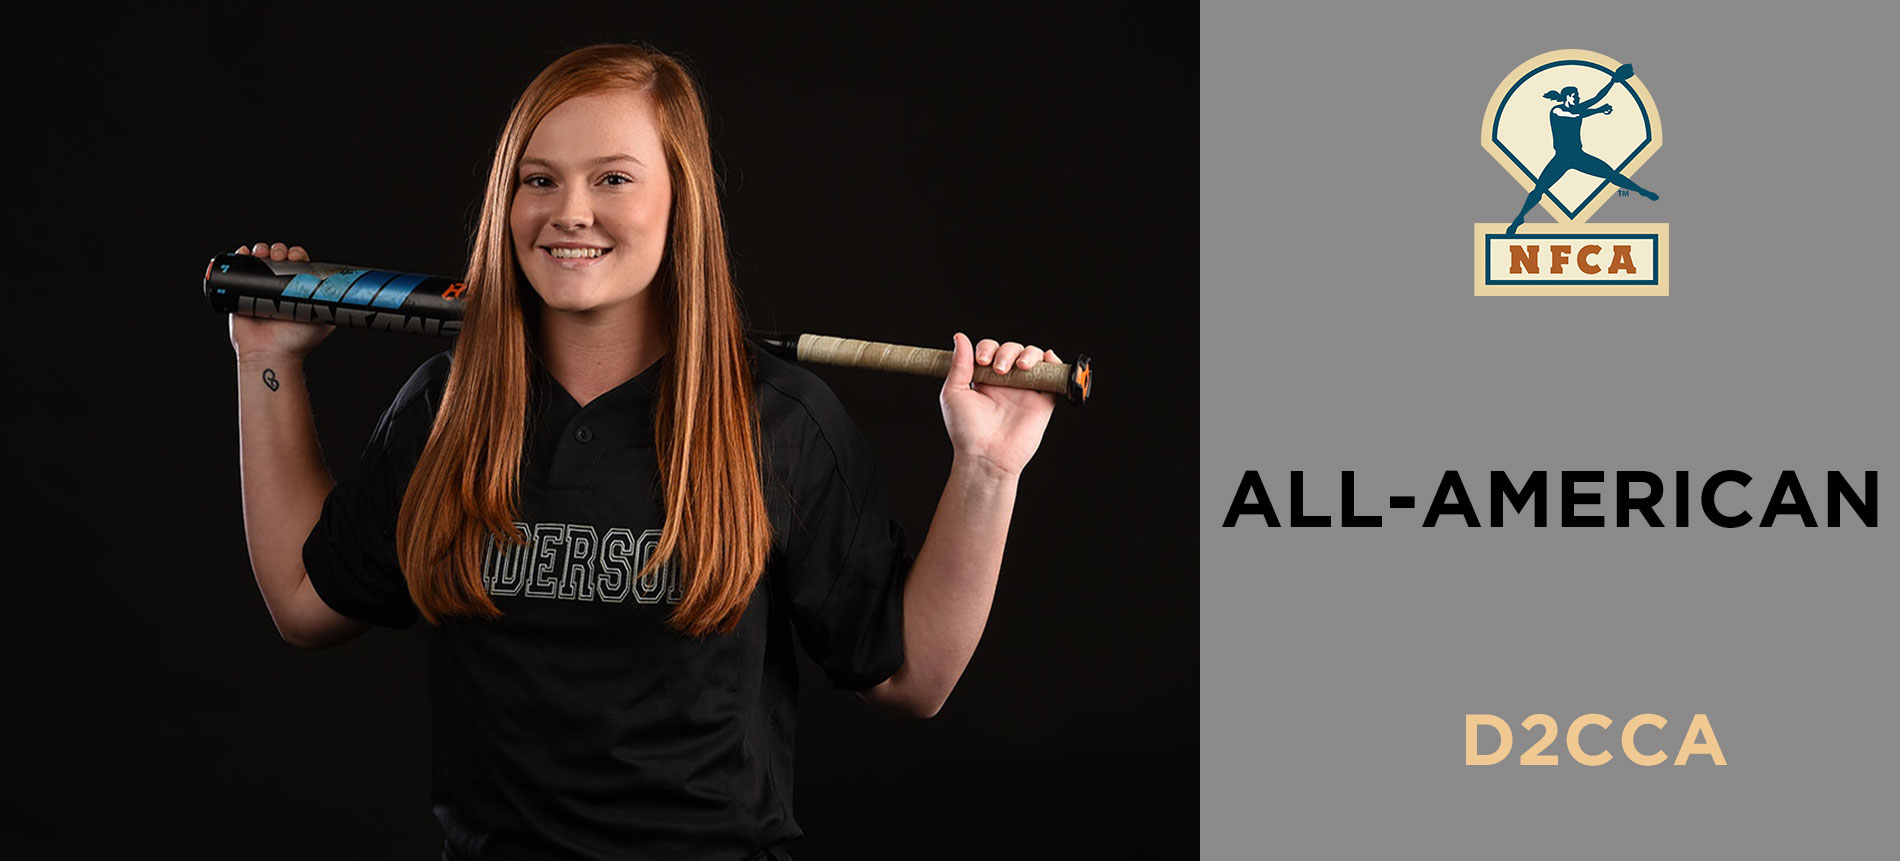 Boatner Earns Both NFCA and D2CCA NCAA Division II All-American Honors